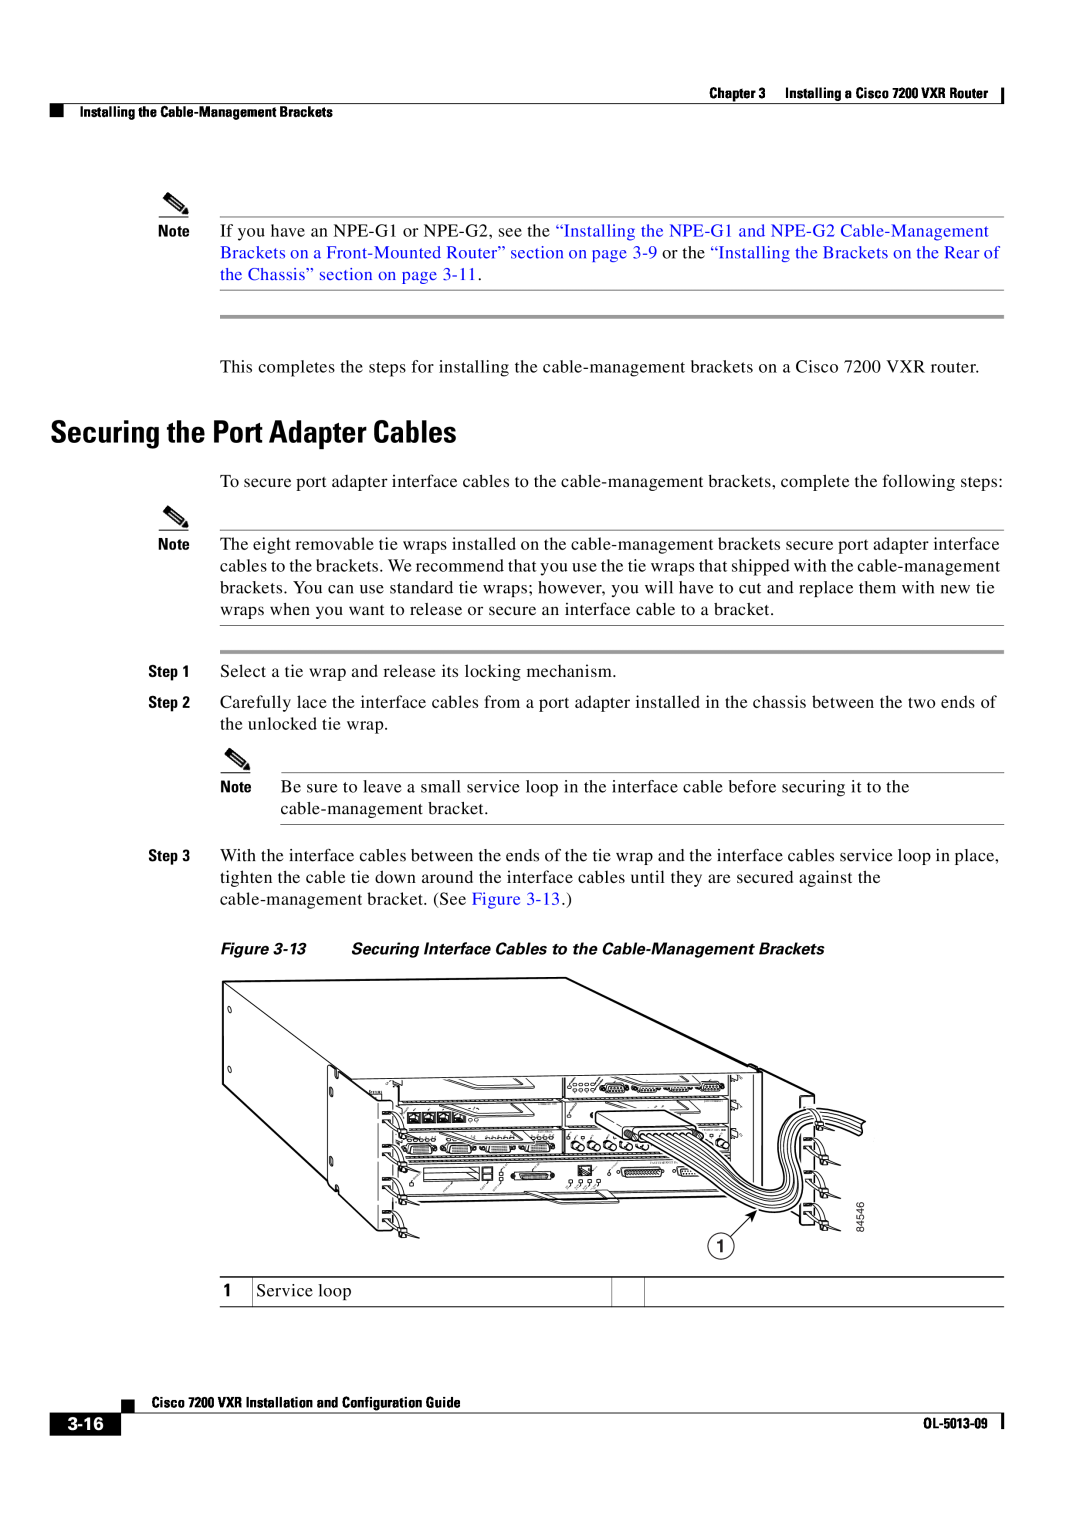 Cisco Systems 7200 VXR manual Securing the Port Adapter Cables, 3-16 